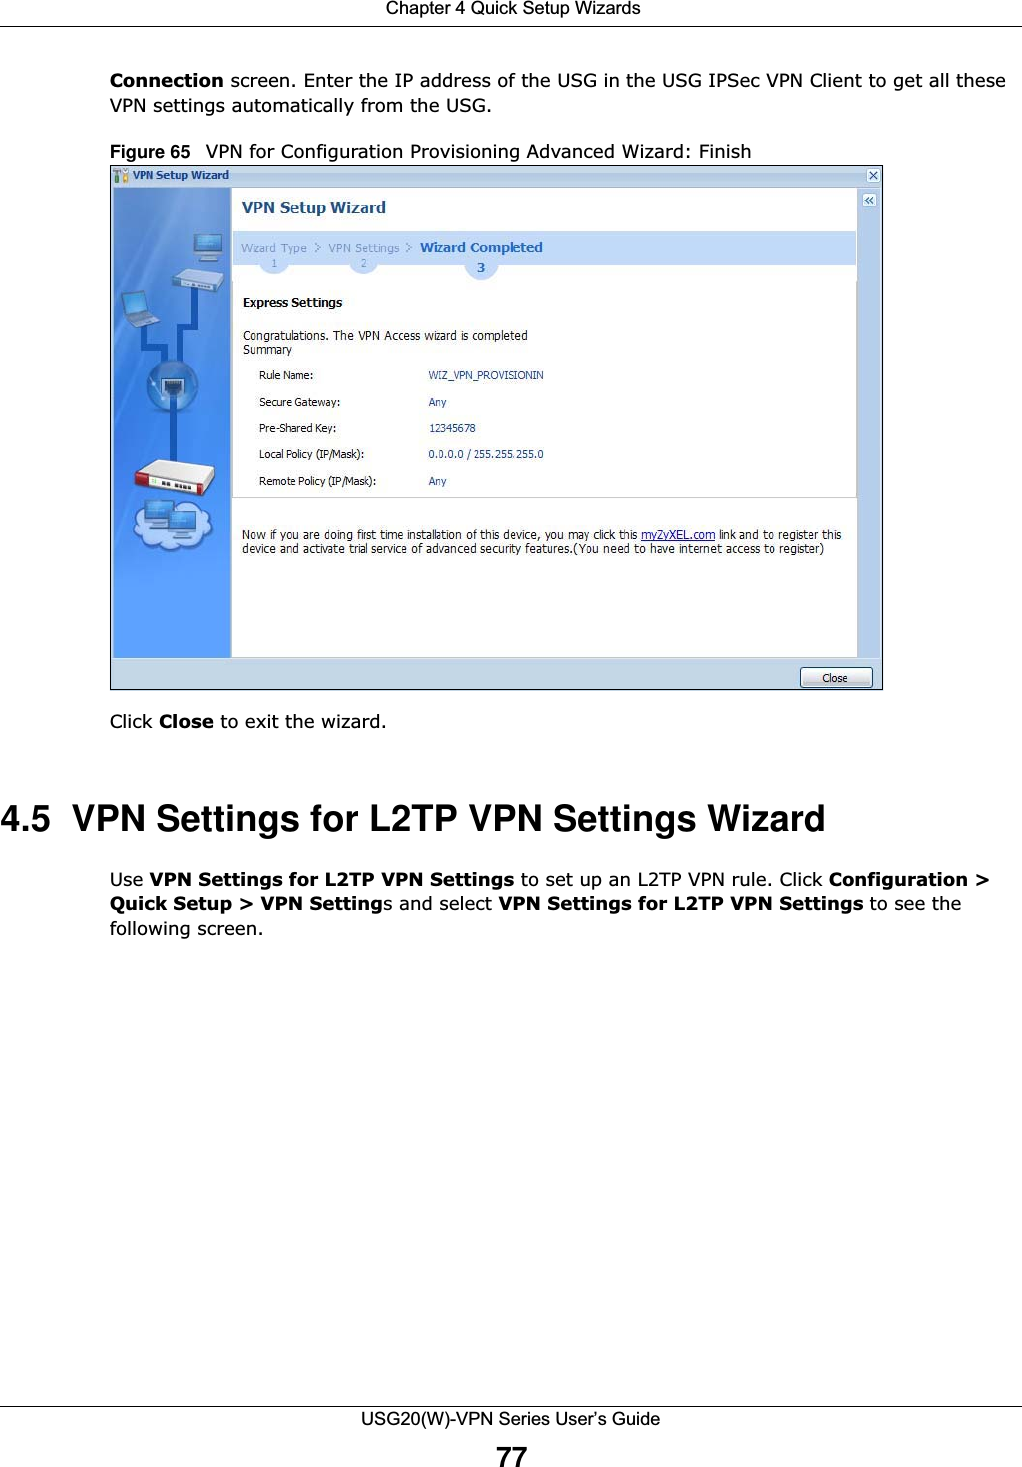  Chapter 4 Quick Setup WizardsUSG20(W)-VPN Series User’s Guide77Connection screen. Enter the IP address of the USG in the USG IPSec VPN Client to get all these VPN settings automatically from the USG.Figure 65   VPN for Configuration Provisioning Advanced Wizard: Finish   Click Close to exit the wizard.4.5  VPN Settings for L2TP VPN Settings WizardUse VPN Settings for L2TP VPN Settings to set up an L2TP VPN rule. Click Configuration &gt; Quick Setup &gt; VPN Settings and select VPN Settings for L2TP VPN Settings to see the following screen.